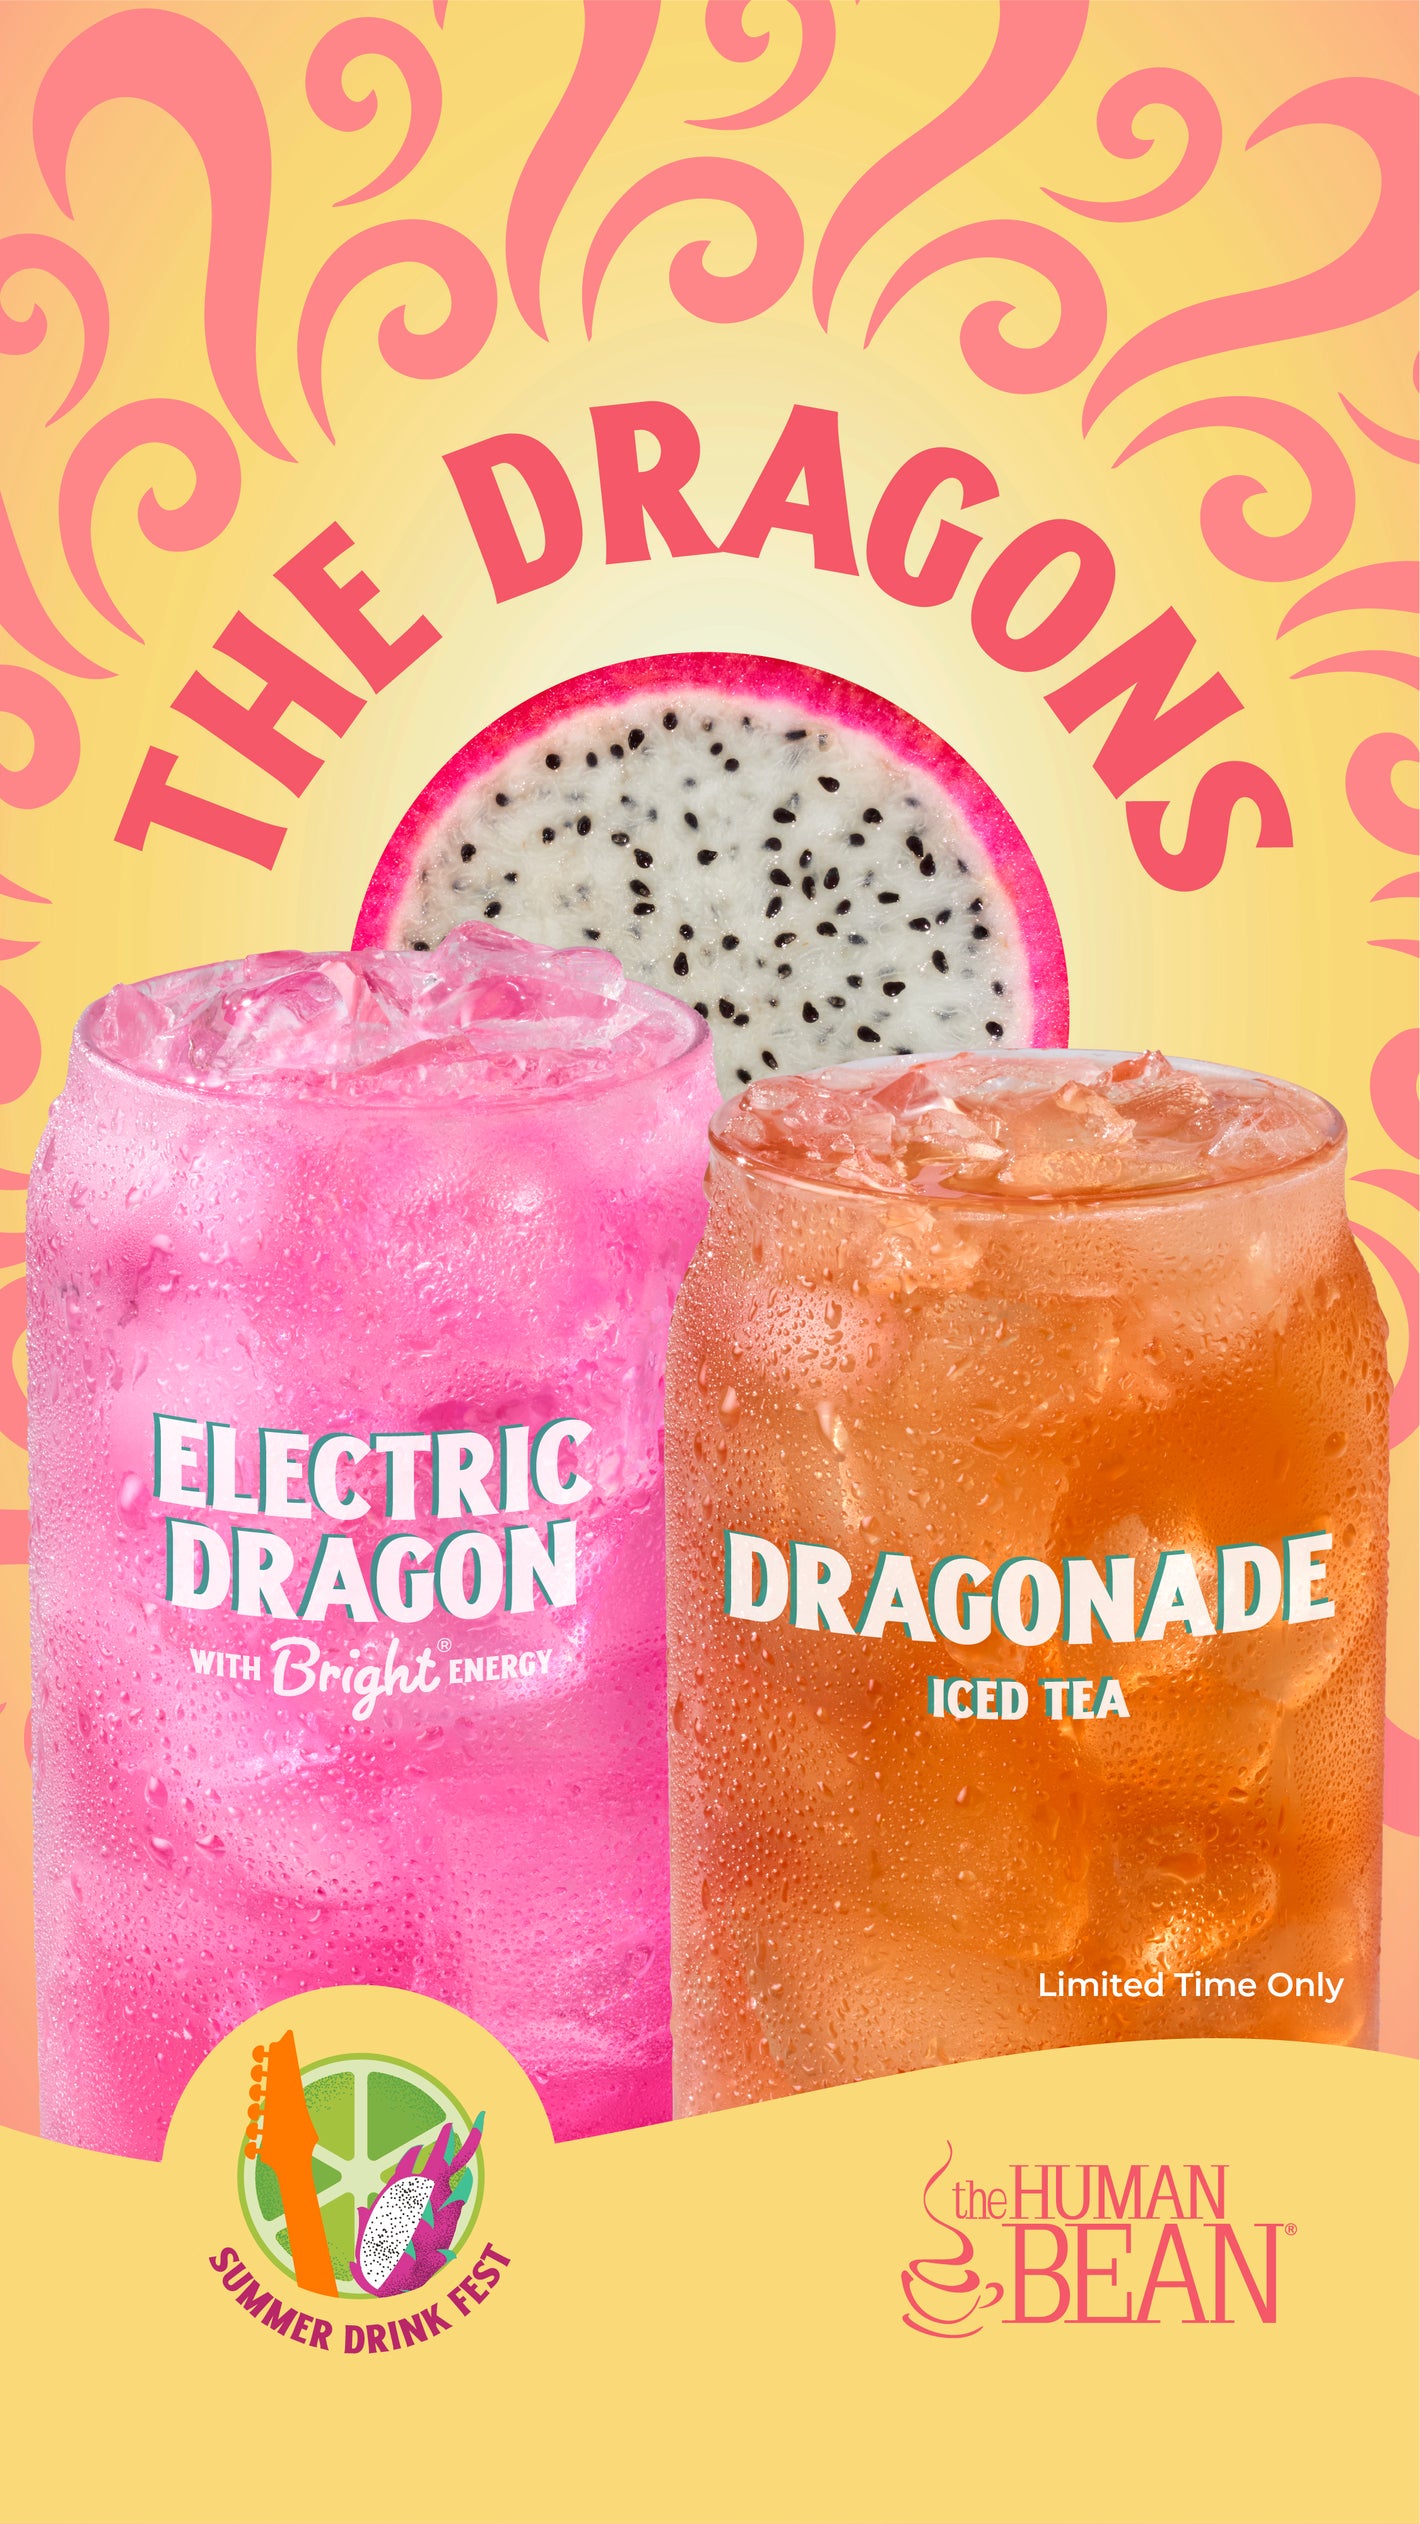 The Dragons Electric Dragons with Bright Energy and Dragonade Iced Tea